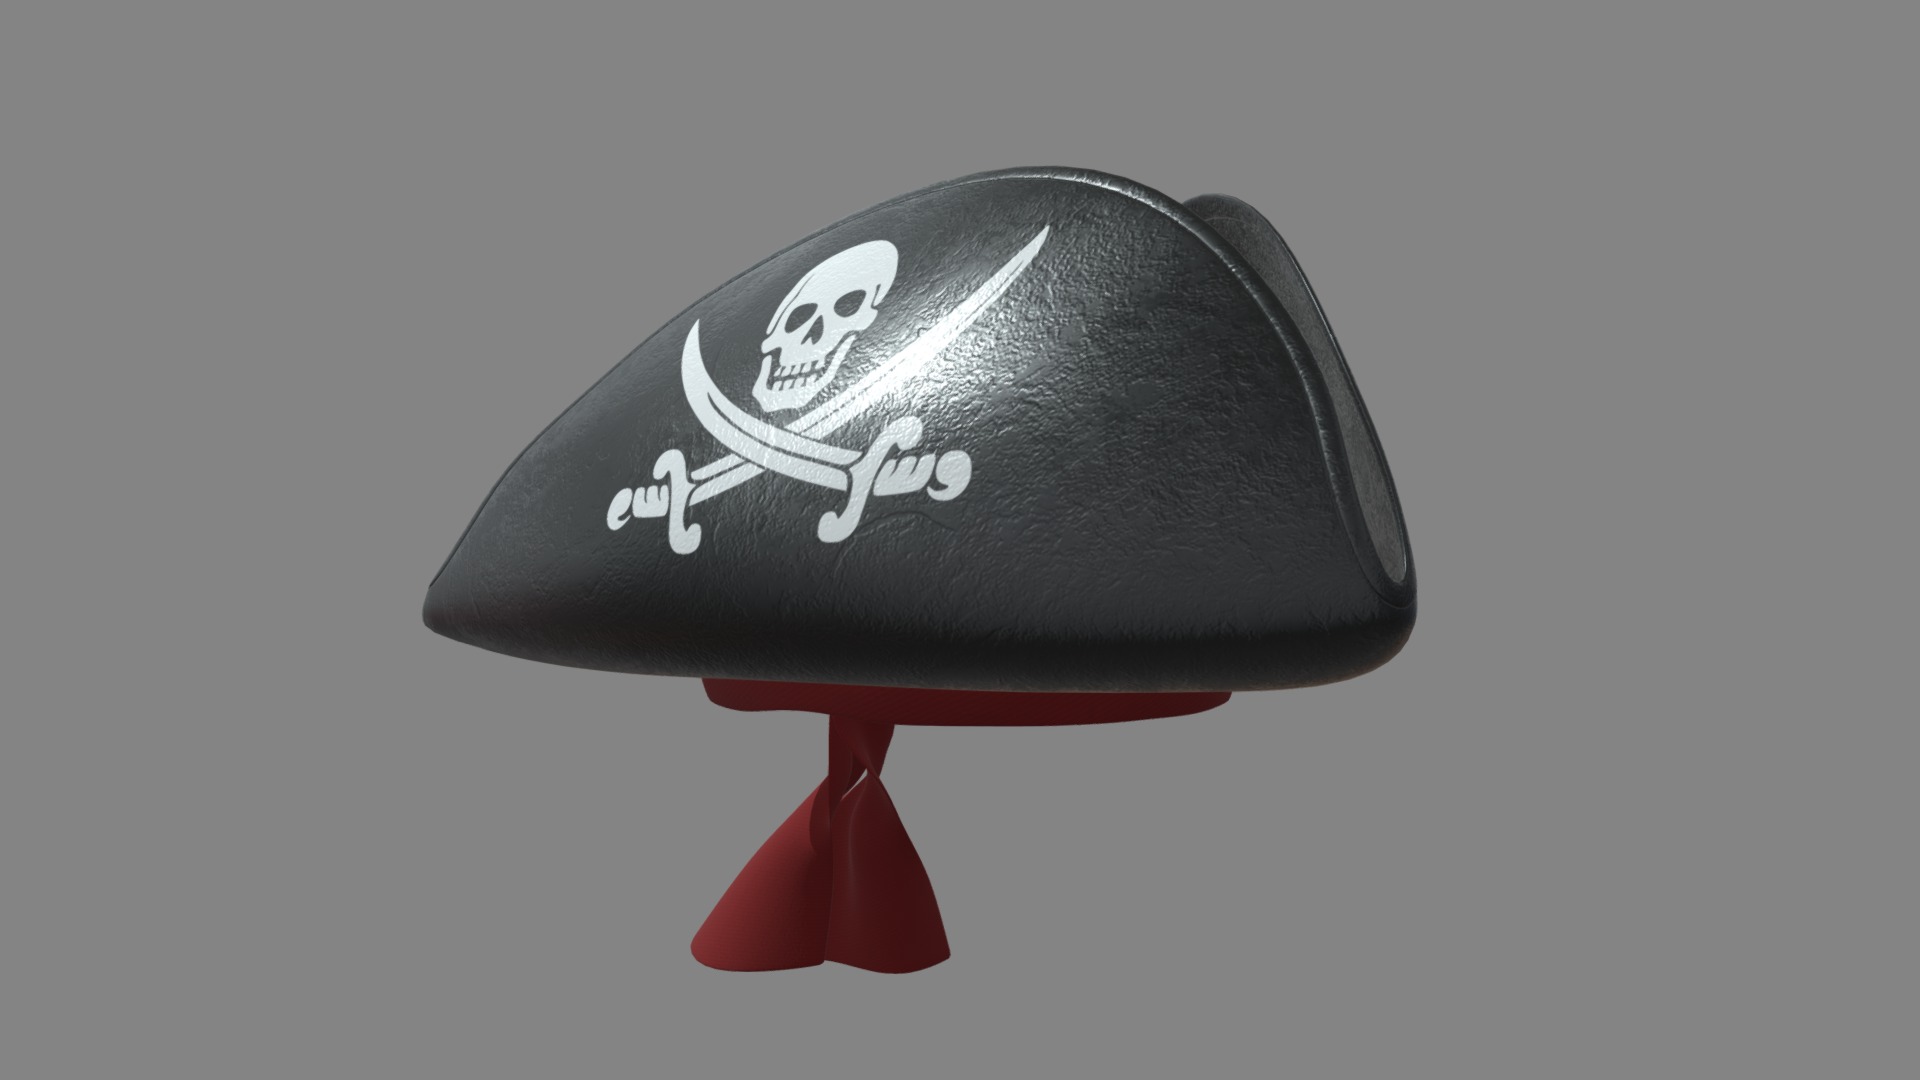 3D model Pirate tricorn hat with skulls and a red bandana - This is a 3D model of the Pirate tricorn hat with skulls and a red bandana. The 3D model is about a black and white image of a cartoon character on a black circle.